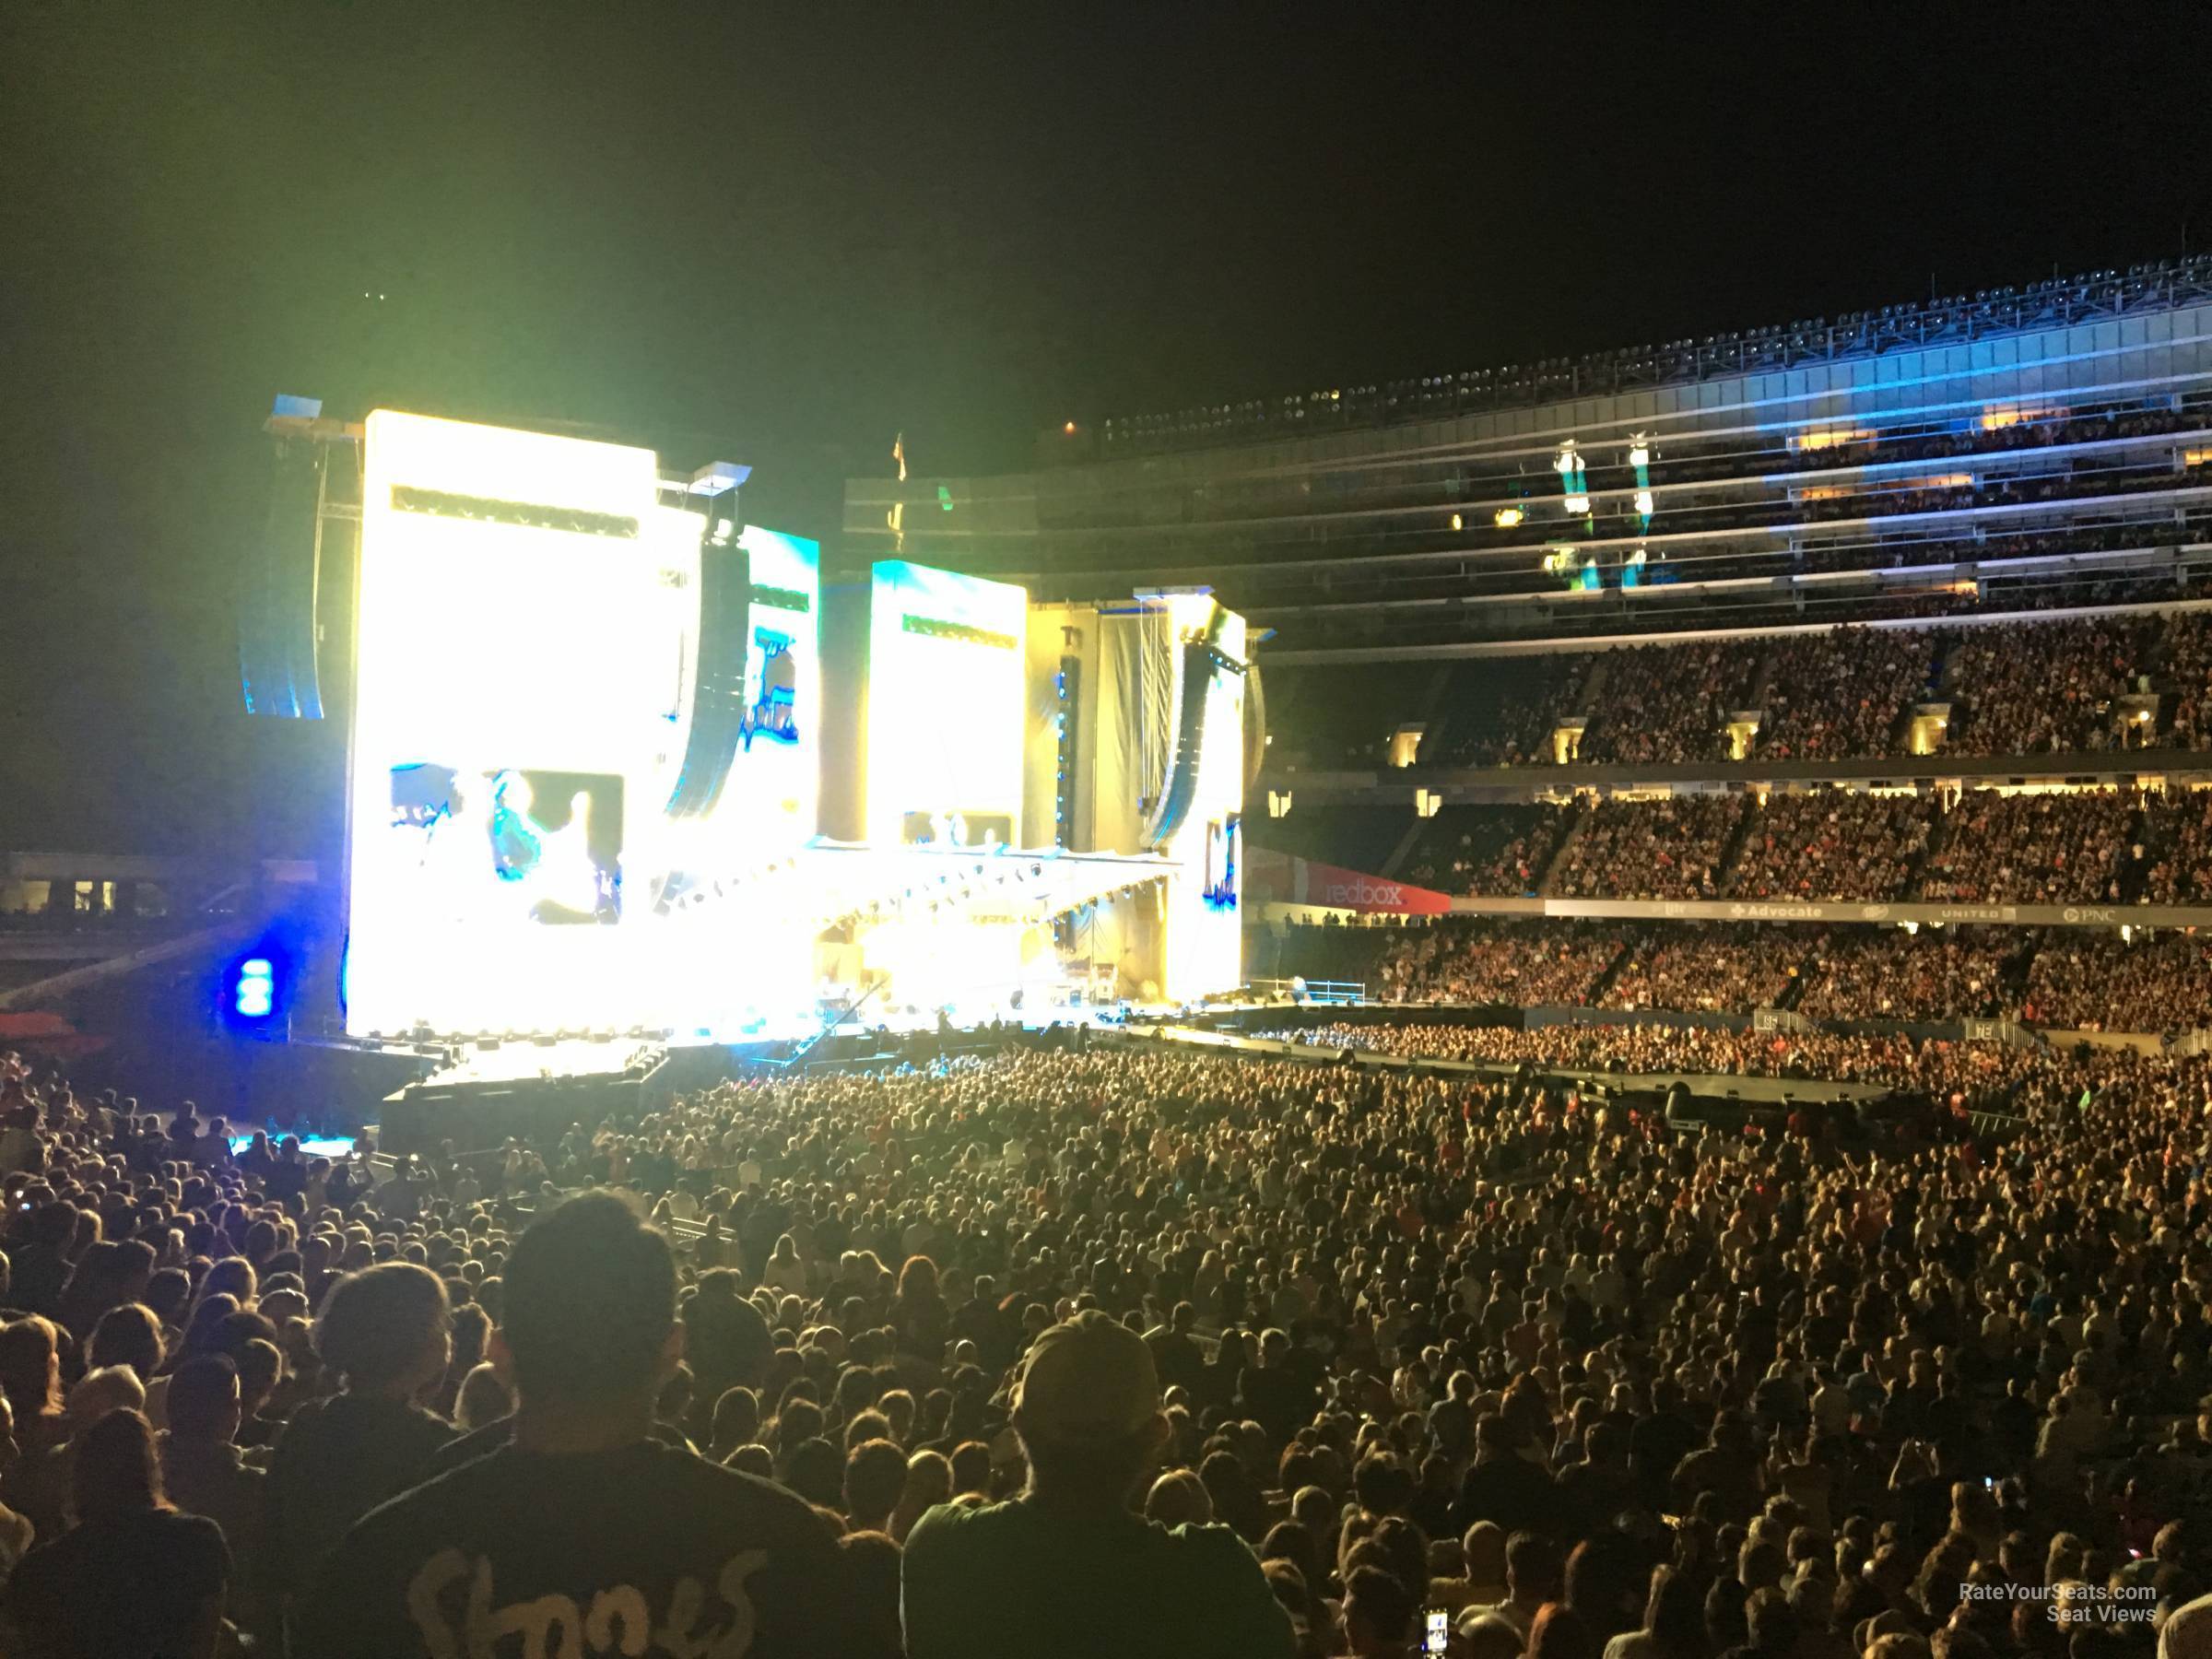 section 136, row 19 seat view  for concert - soldier field